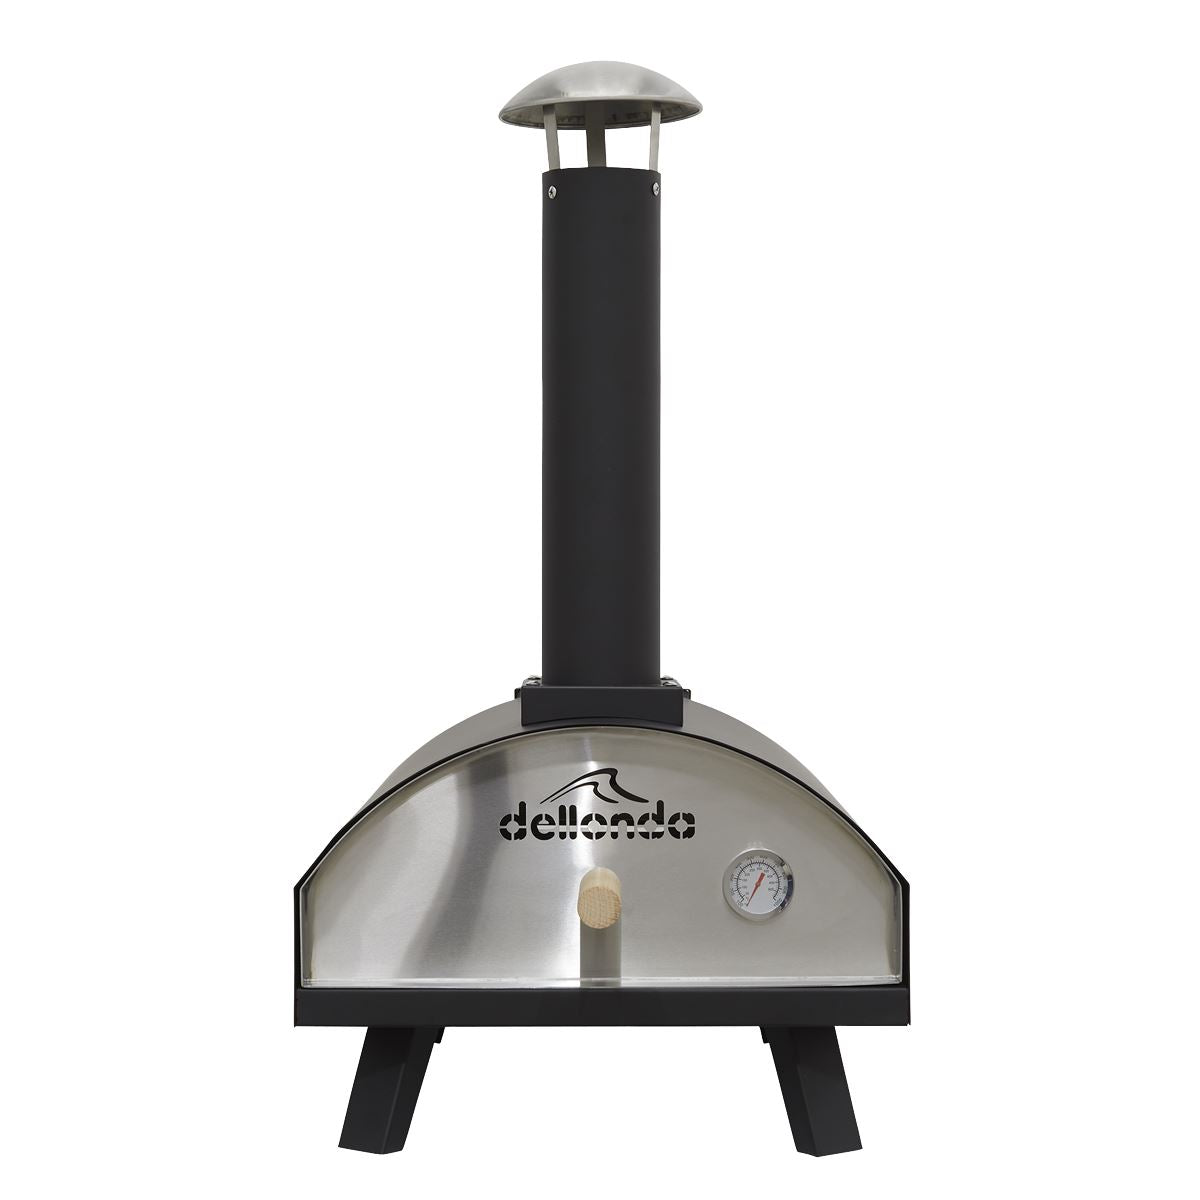 Dellonda Portable Wood-Fired 14" Pizza & Smoking Oven - Black/Stainless Steel